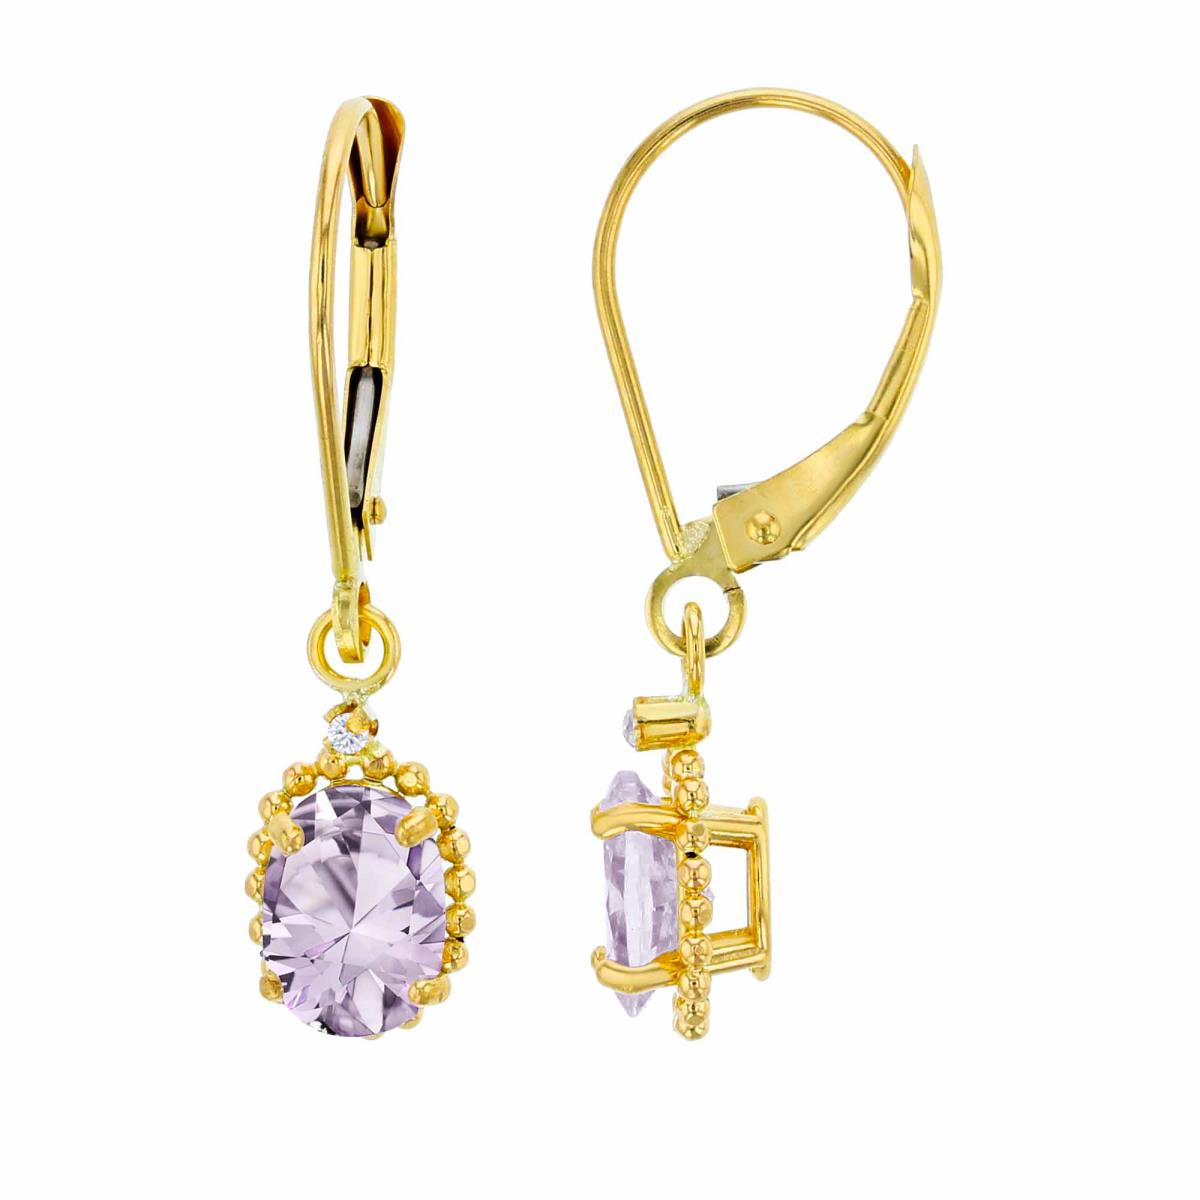 10K Yellow Gold 1.25mm Rd Created White Sapphire & 6x4mm Ov Rose De France Bead Frame Drop Lever-Back Earring